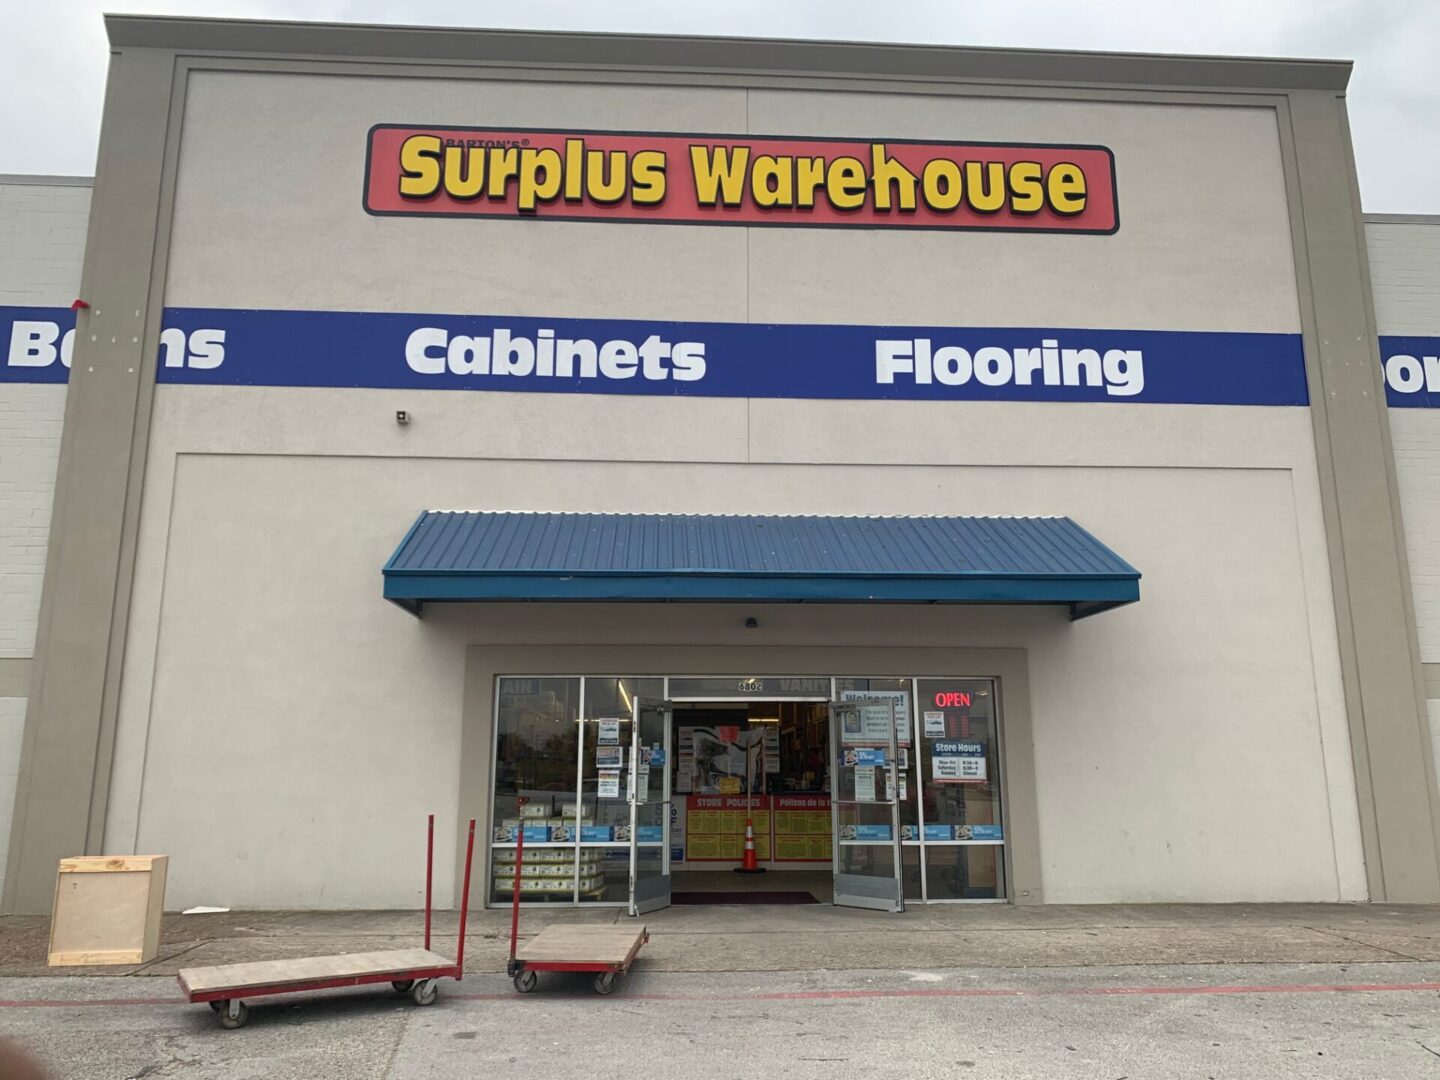 Surplus warehouse front view on the display